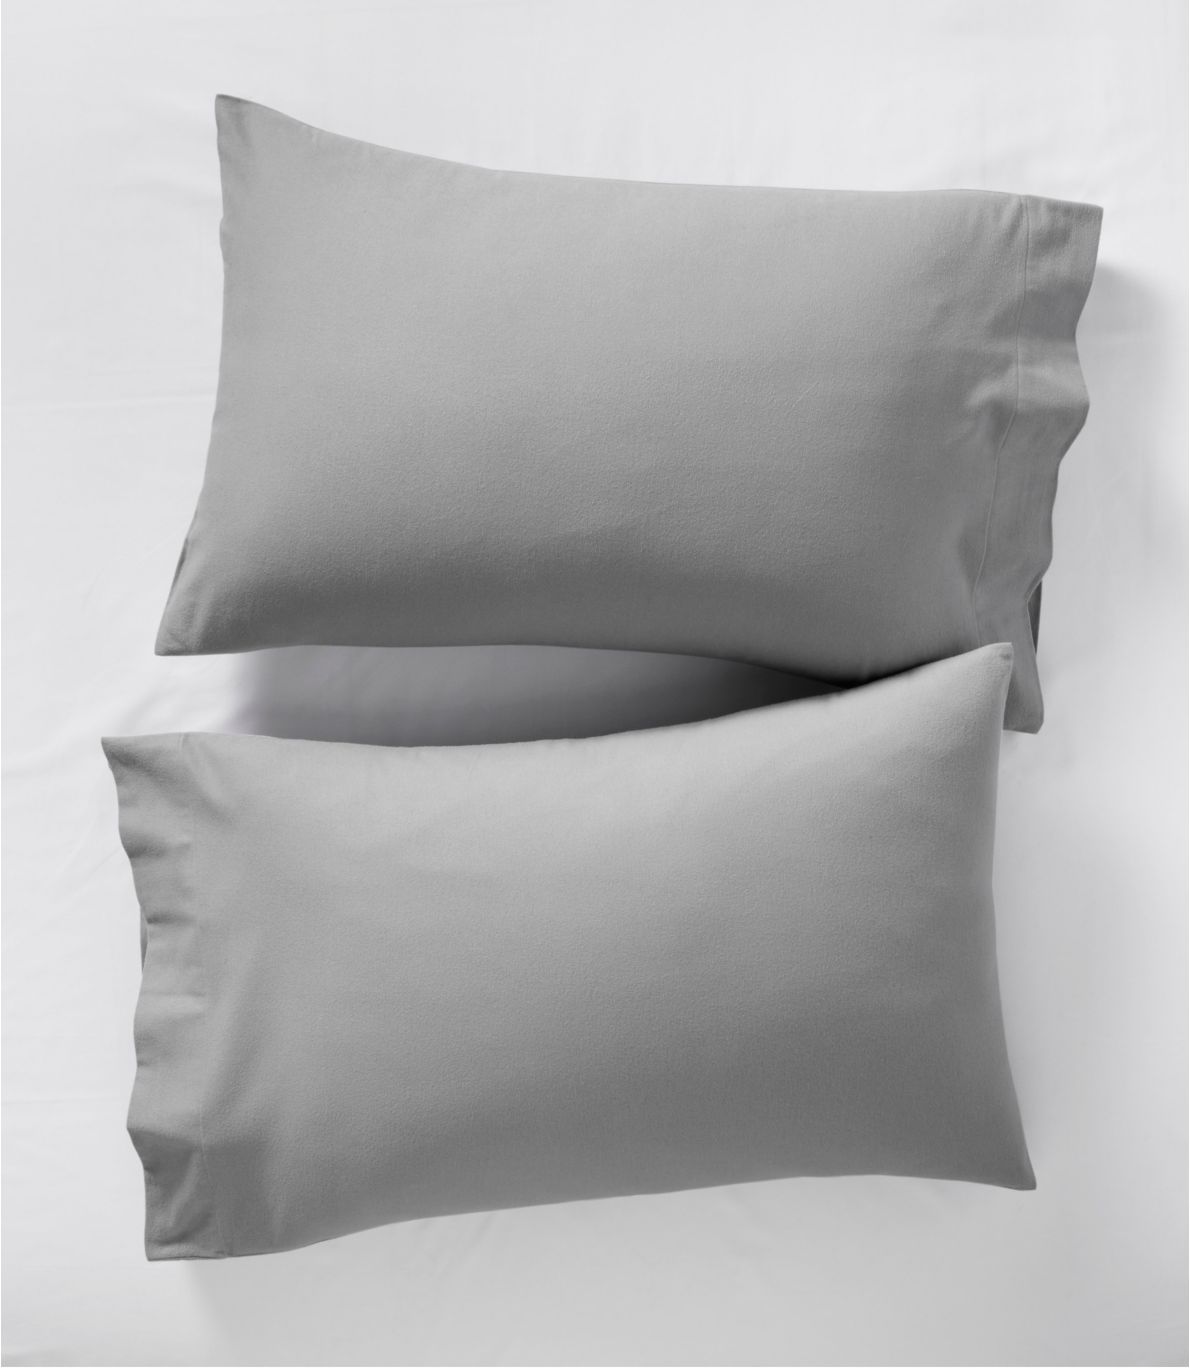 Ultrasoft Comfort Flannel Pillowcases, Set of Two